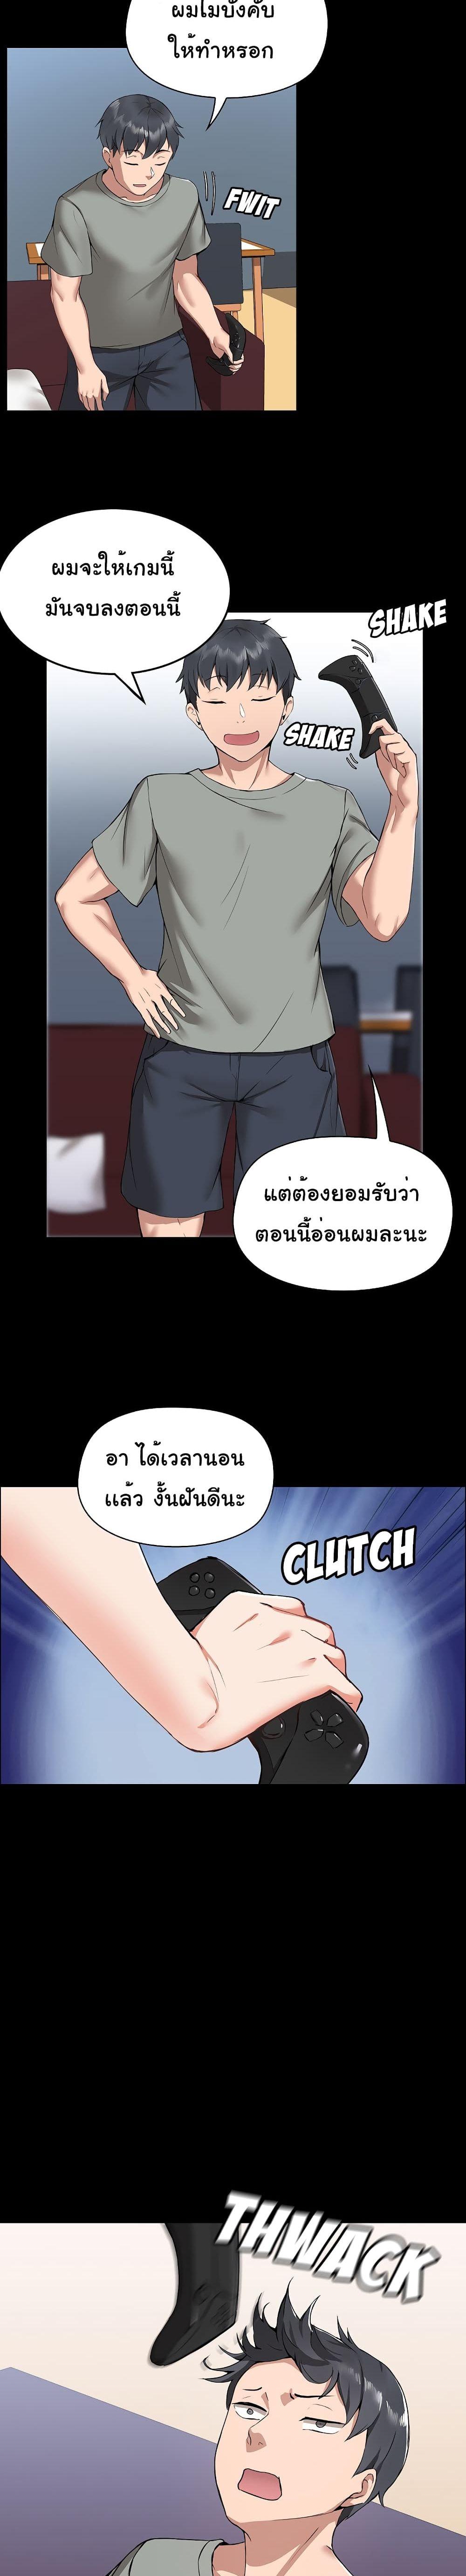 All About That Game Life 1 ภาพ 15